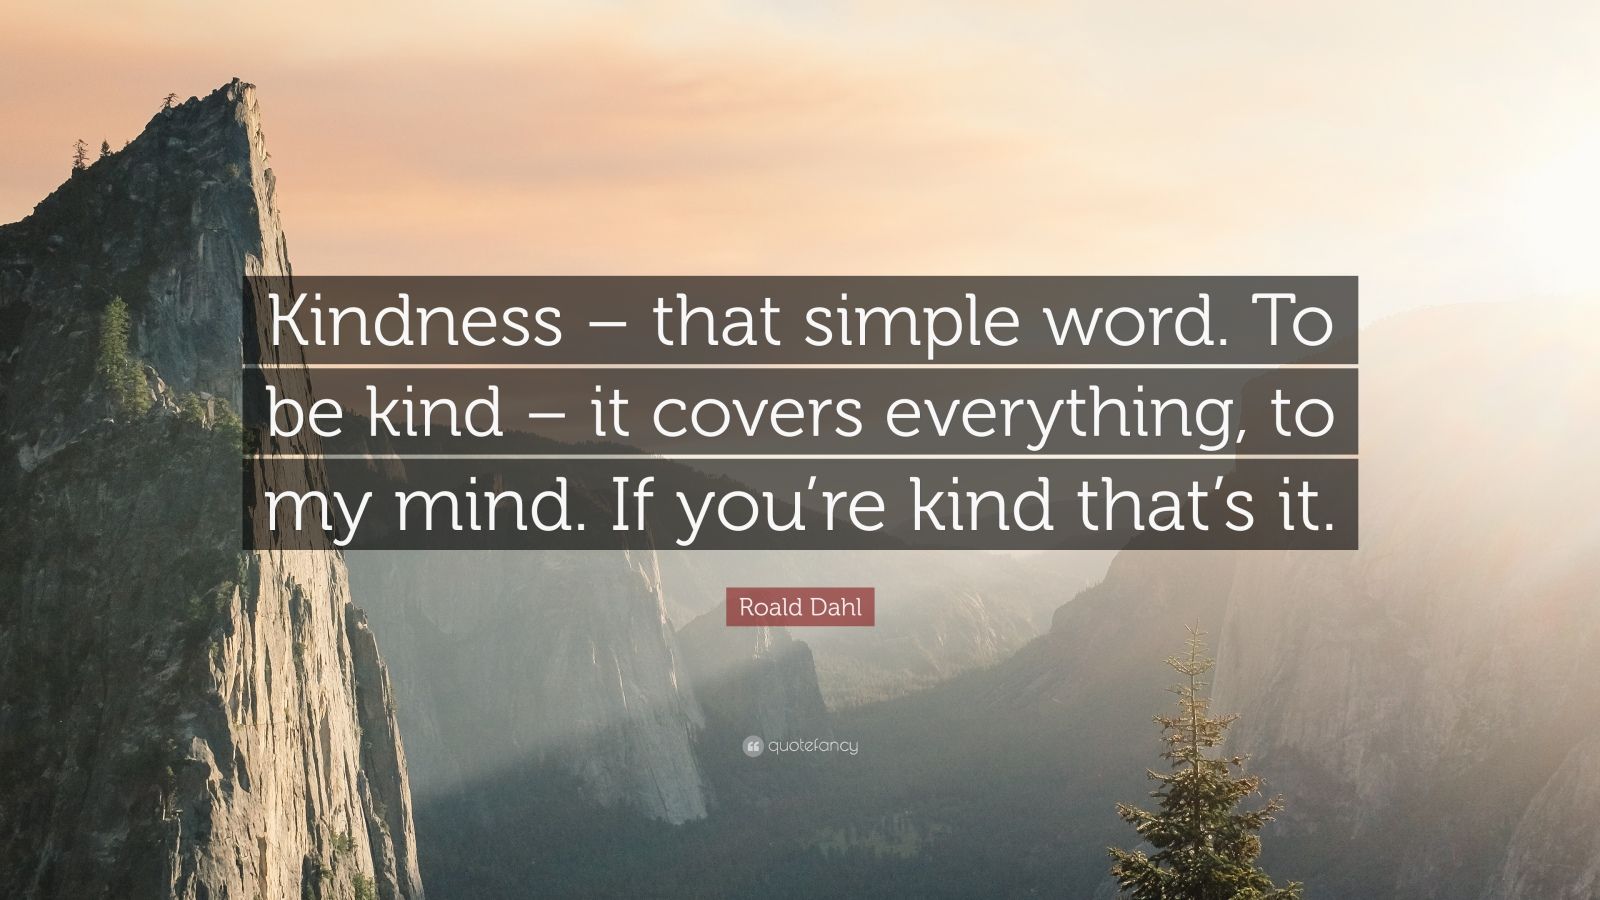 Roald Dahl Quote: "Kindness - that simple word. To be kind - it covers everything, to my mind ...